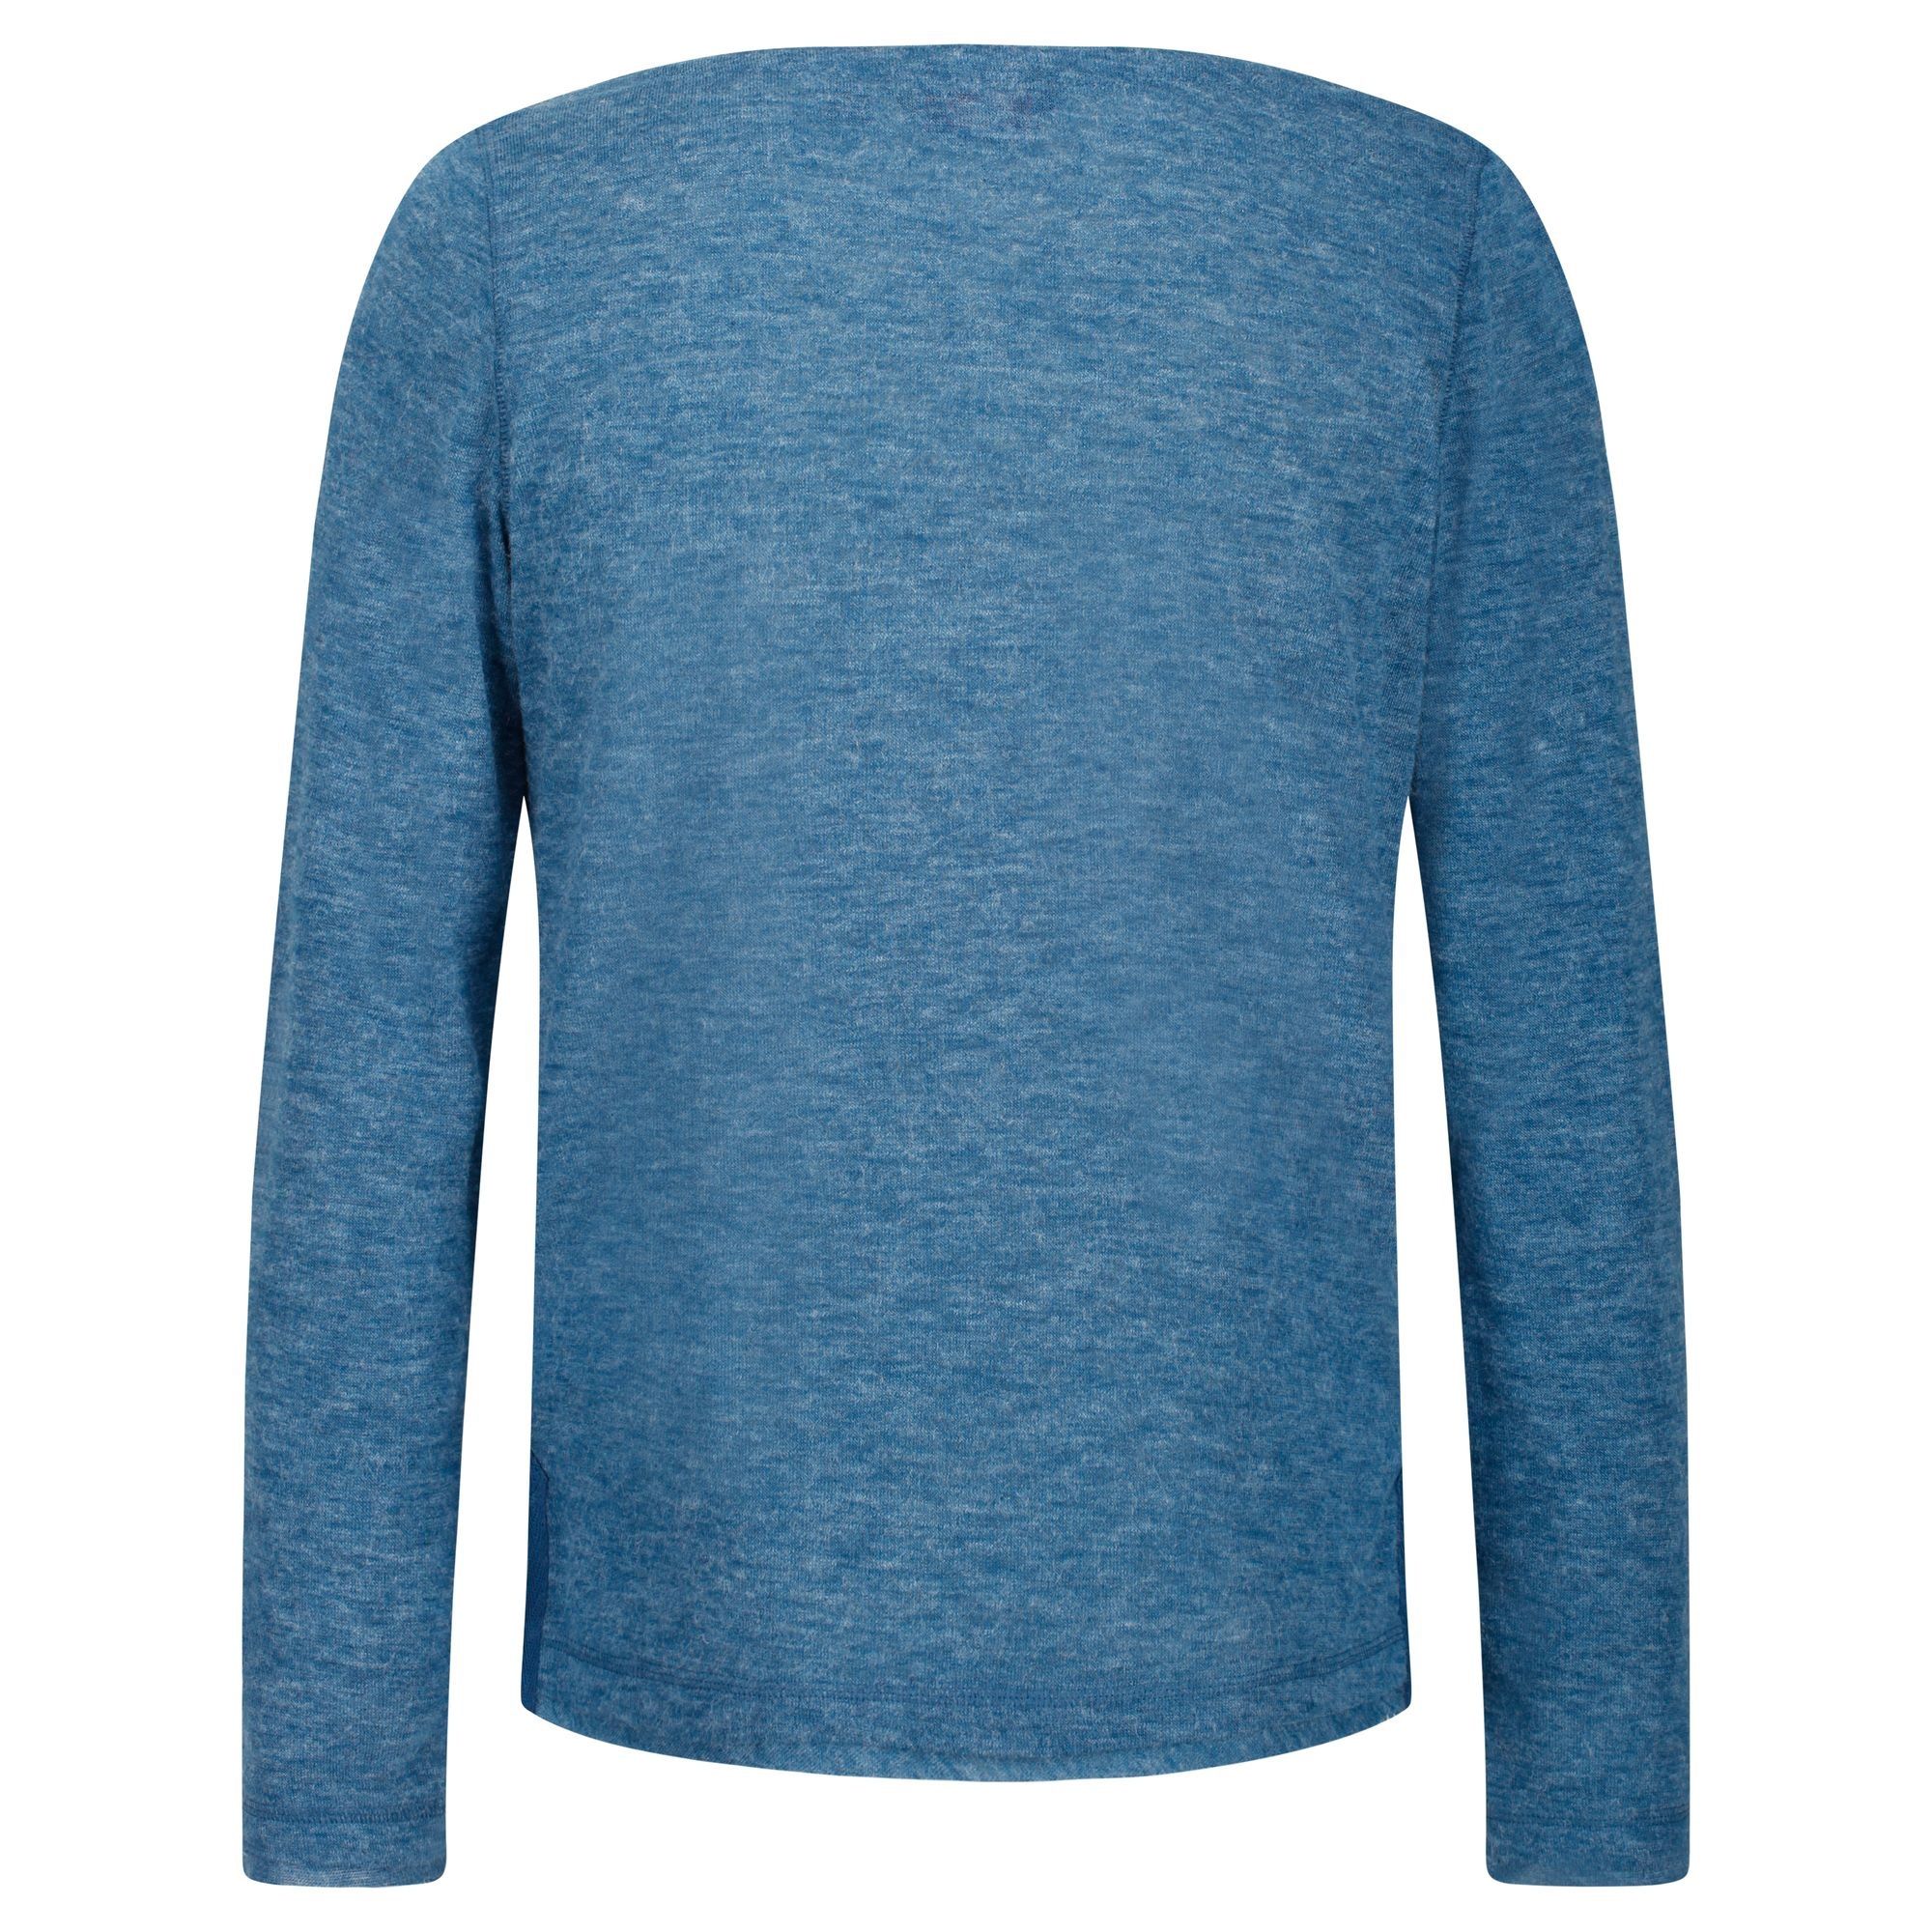 Womens long sleeved T-shirt made of 180gsm lightweight wool look fabric. Cowl neck style. Comfortable and stylish. 5% Elastane, 7% Viscose/Rayon mix, 88% Polyester.